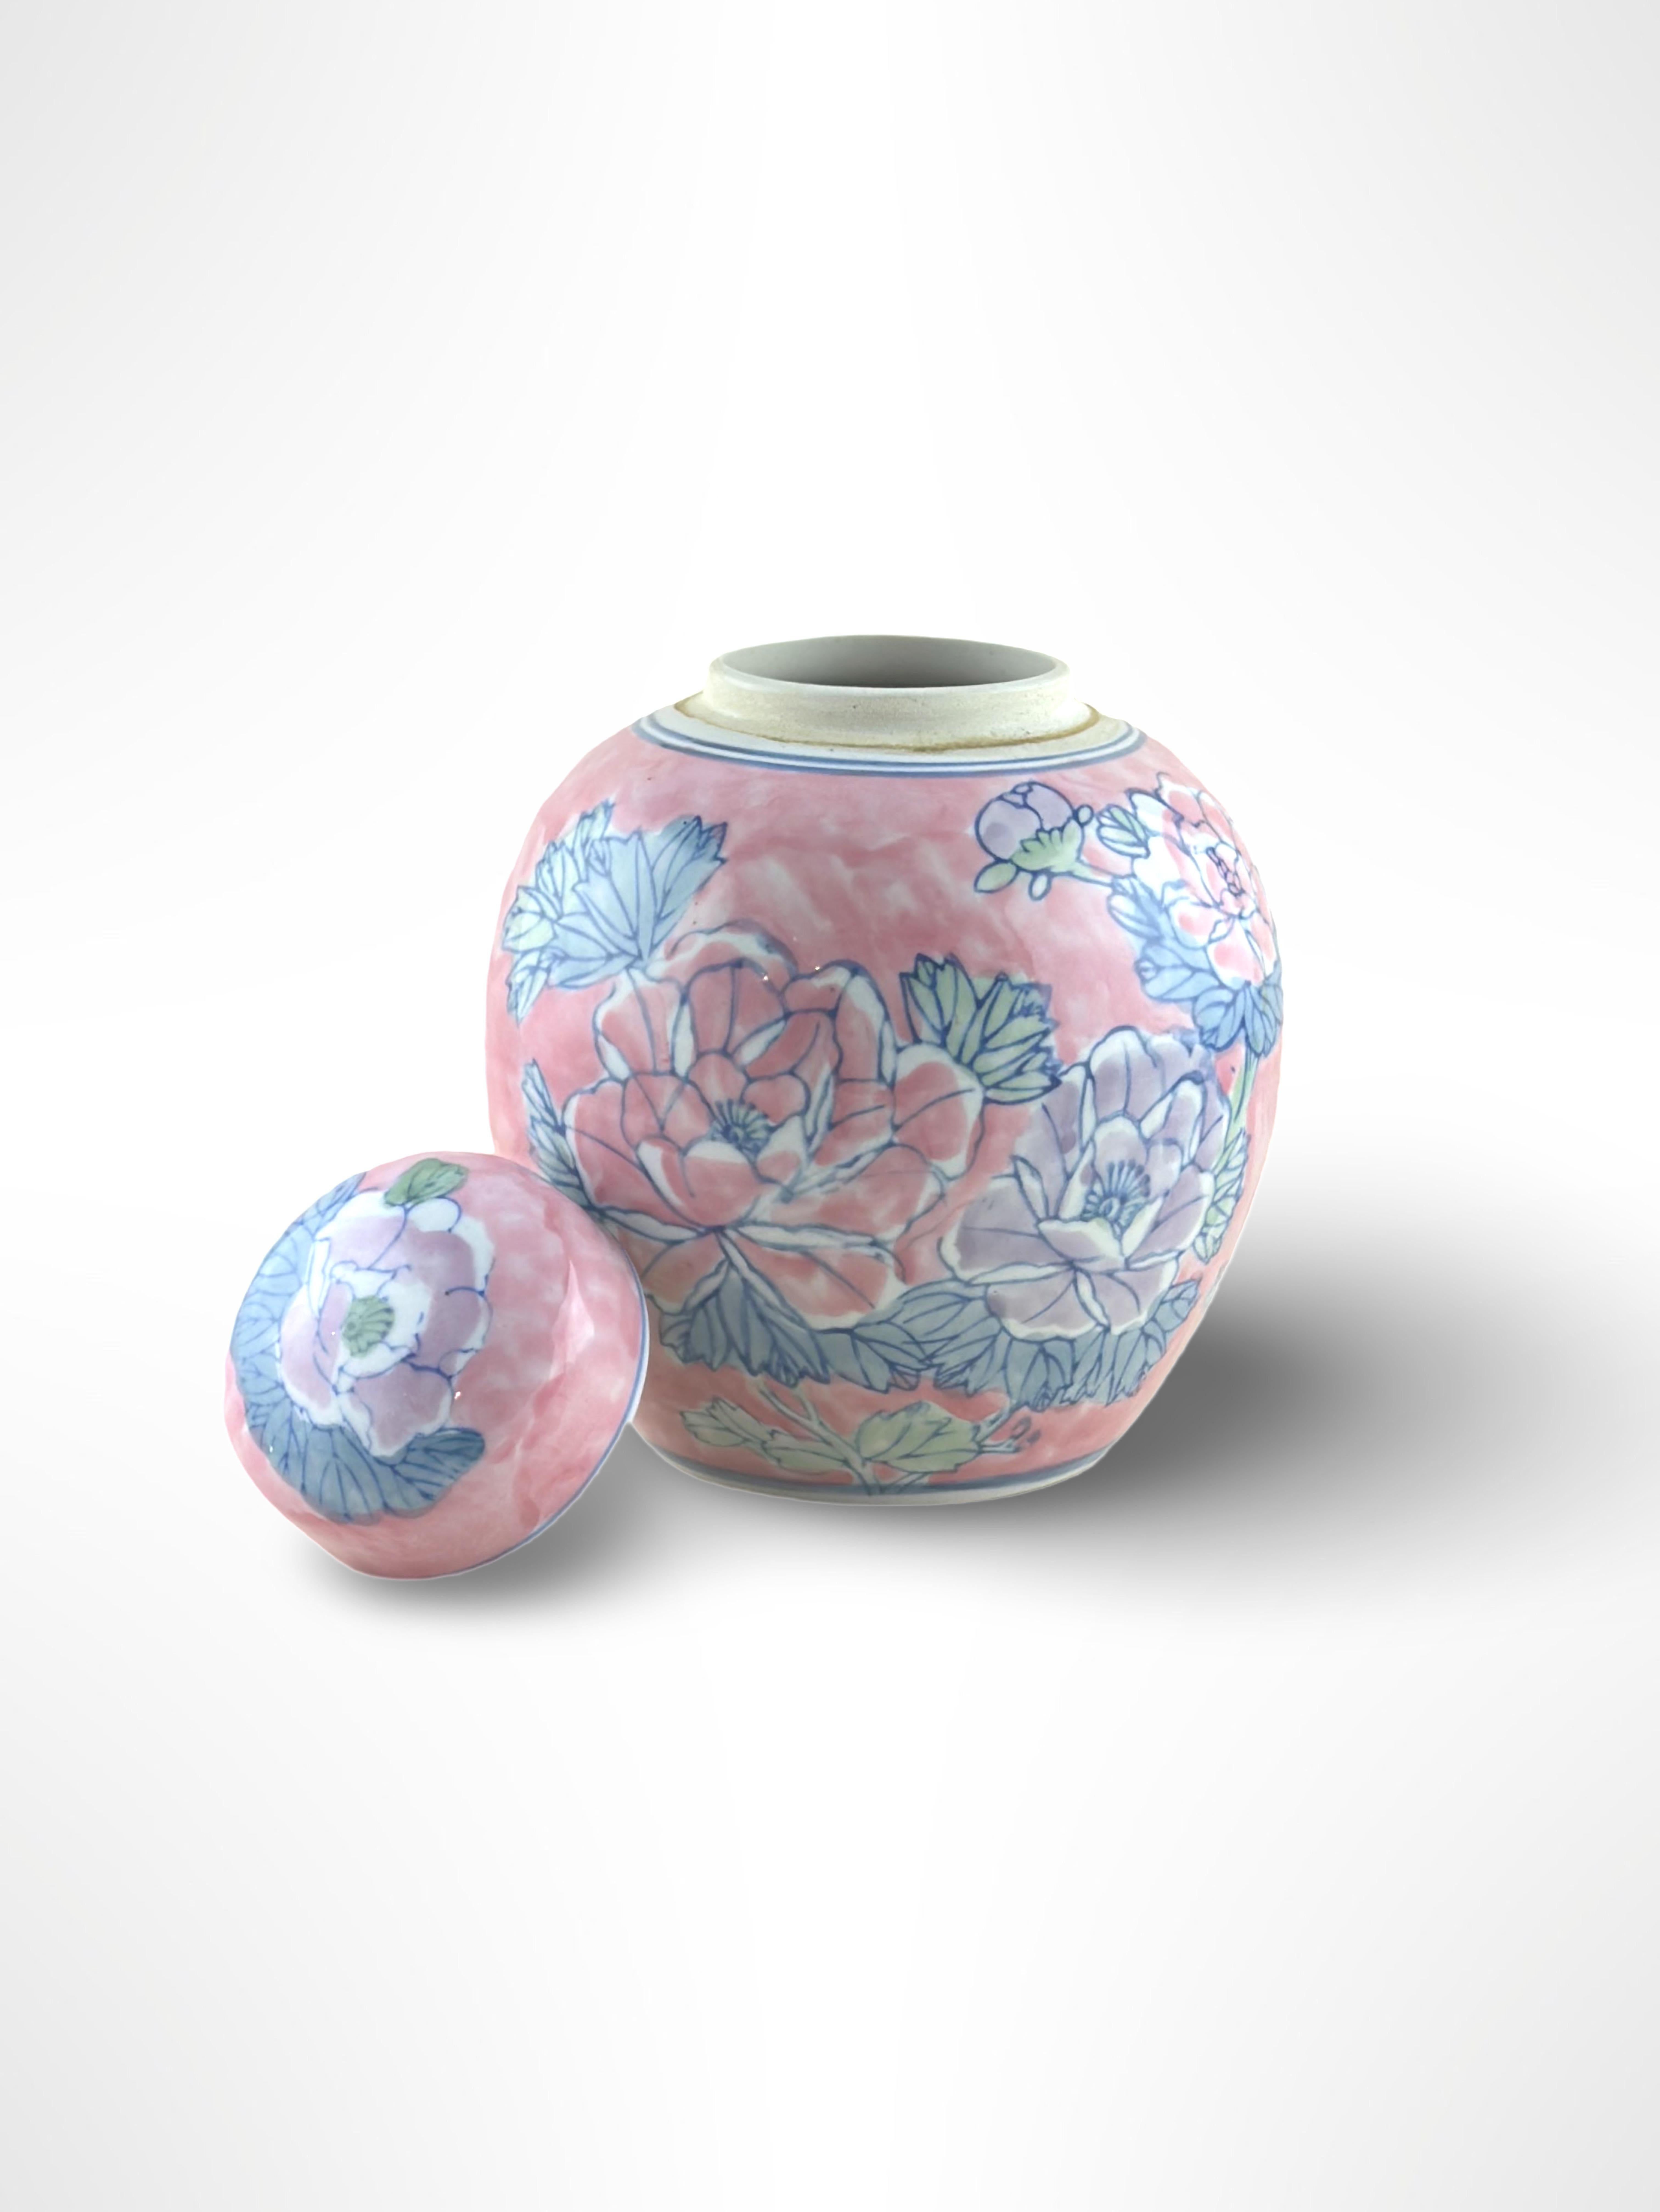 Chinese pink ginger jar.  Crafted in China in the 1980s

A bold and modern iteration of the classic styles of Chinese ginger jars. Decorated with large stylised peony flowers, coloured in lavender and pink hues and accented with cool mint green